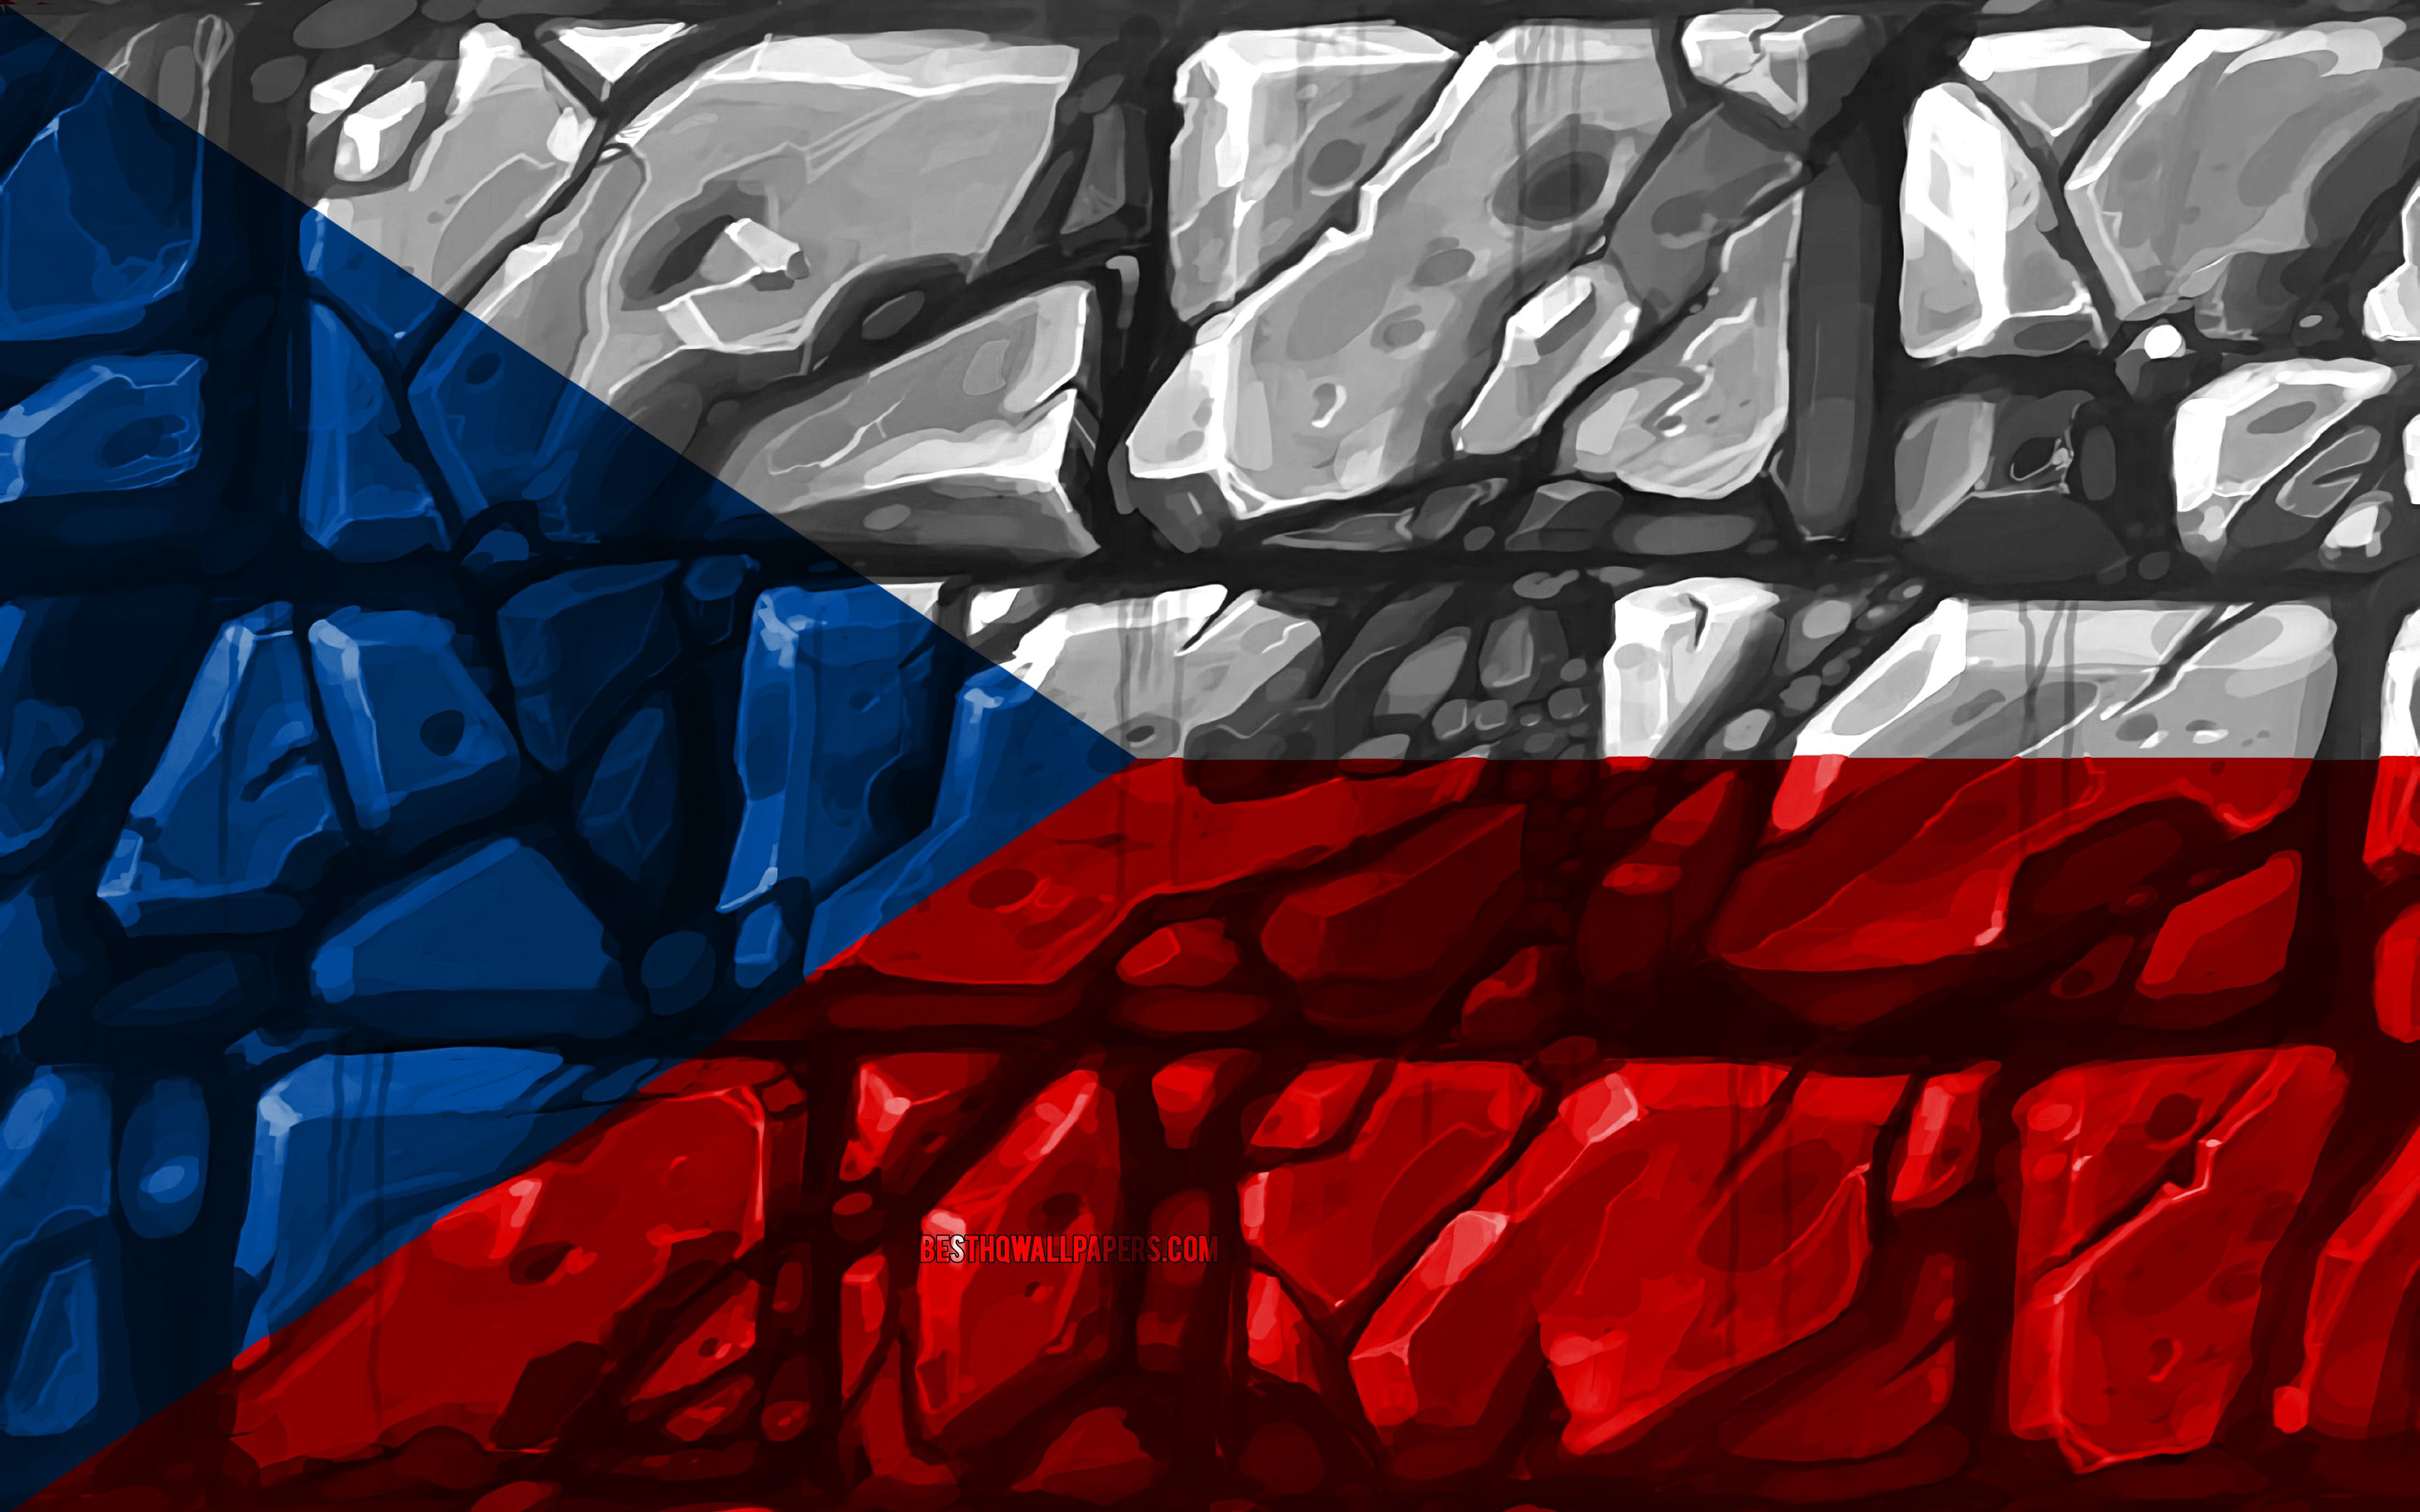 Download wallpaper Czech flag, brickwall, 4k, European countries, national symbols, Flag of Czech Republic, creative, Czech Republic, Europe, Czech Republic 3D flag for desktop with resolution 3840x2400. High Quality HD picture wallpaper